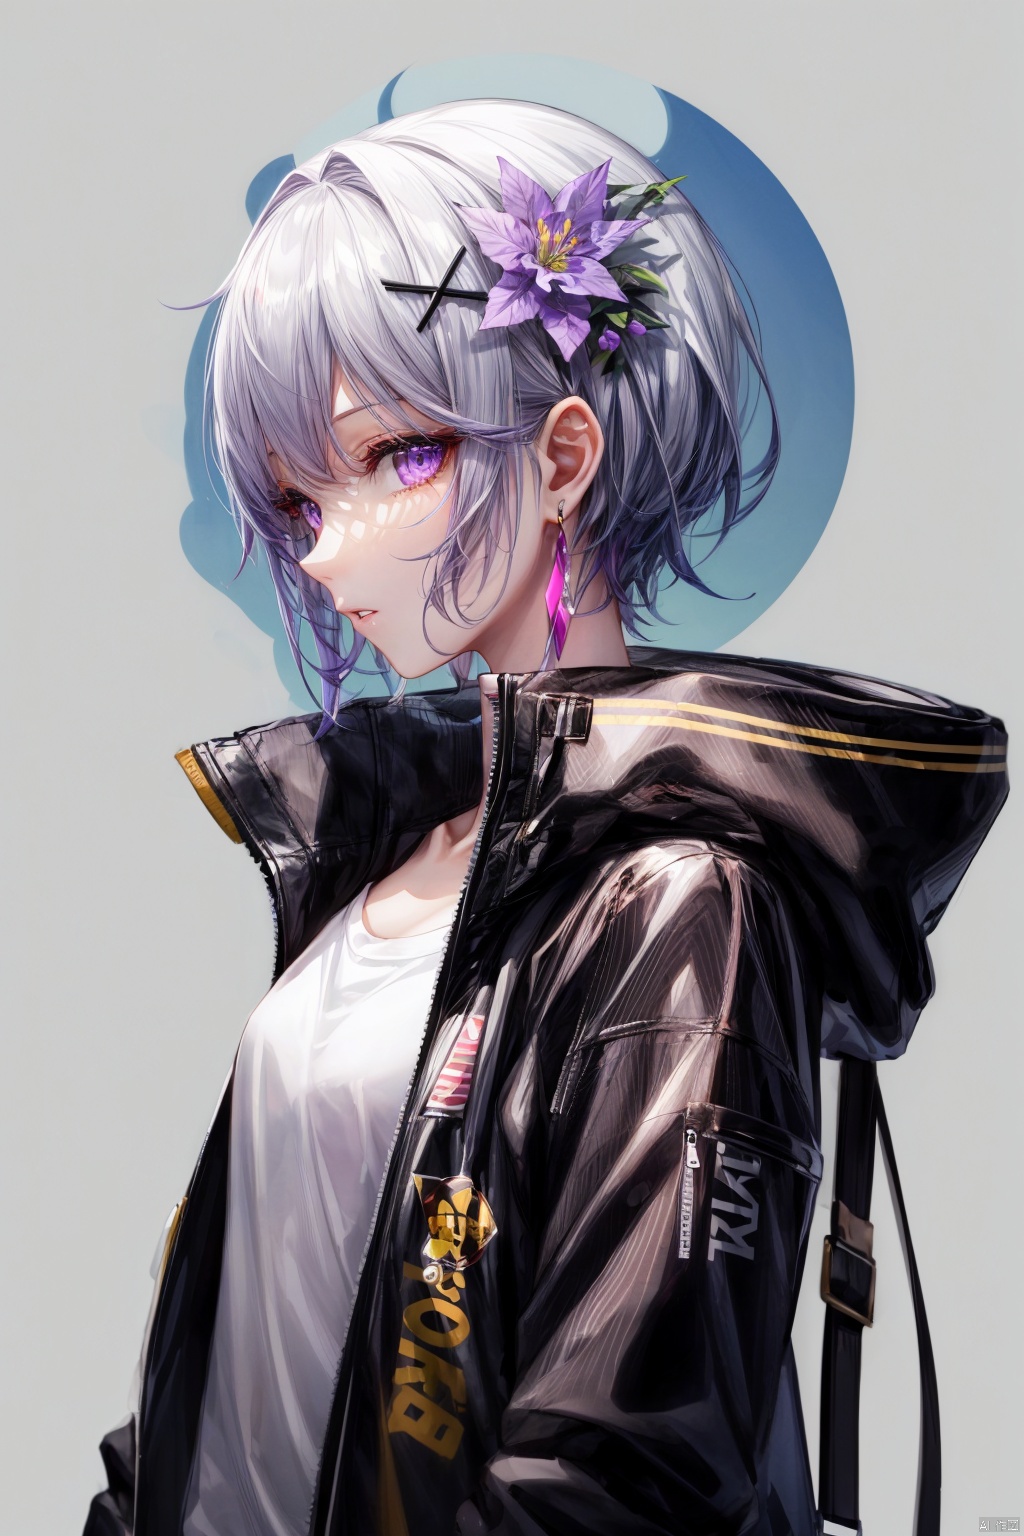  Revised sentence: "A solo girl with short white hair, purple eyes, and a hair ornament is wearing earrings and a black jacket. She has parted lips and is looking at the viewer from the side profile while standing against a simple purple background with a purple flower. Her upper body is covered by the jacket, which has English text on it. Additionally, she has bangs and another hair flower."